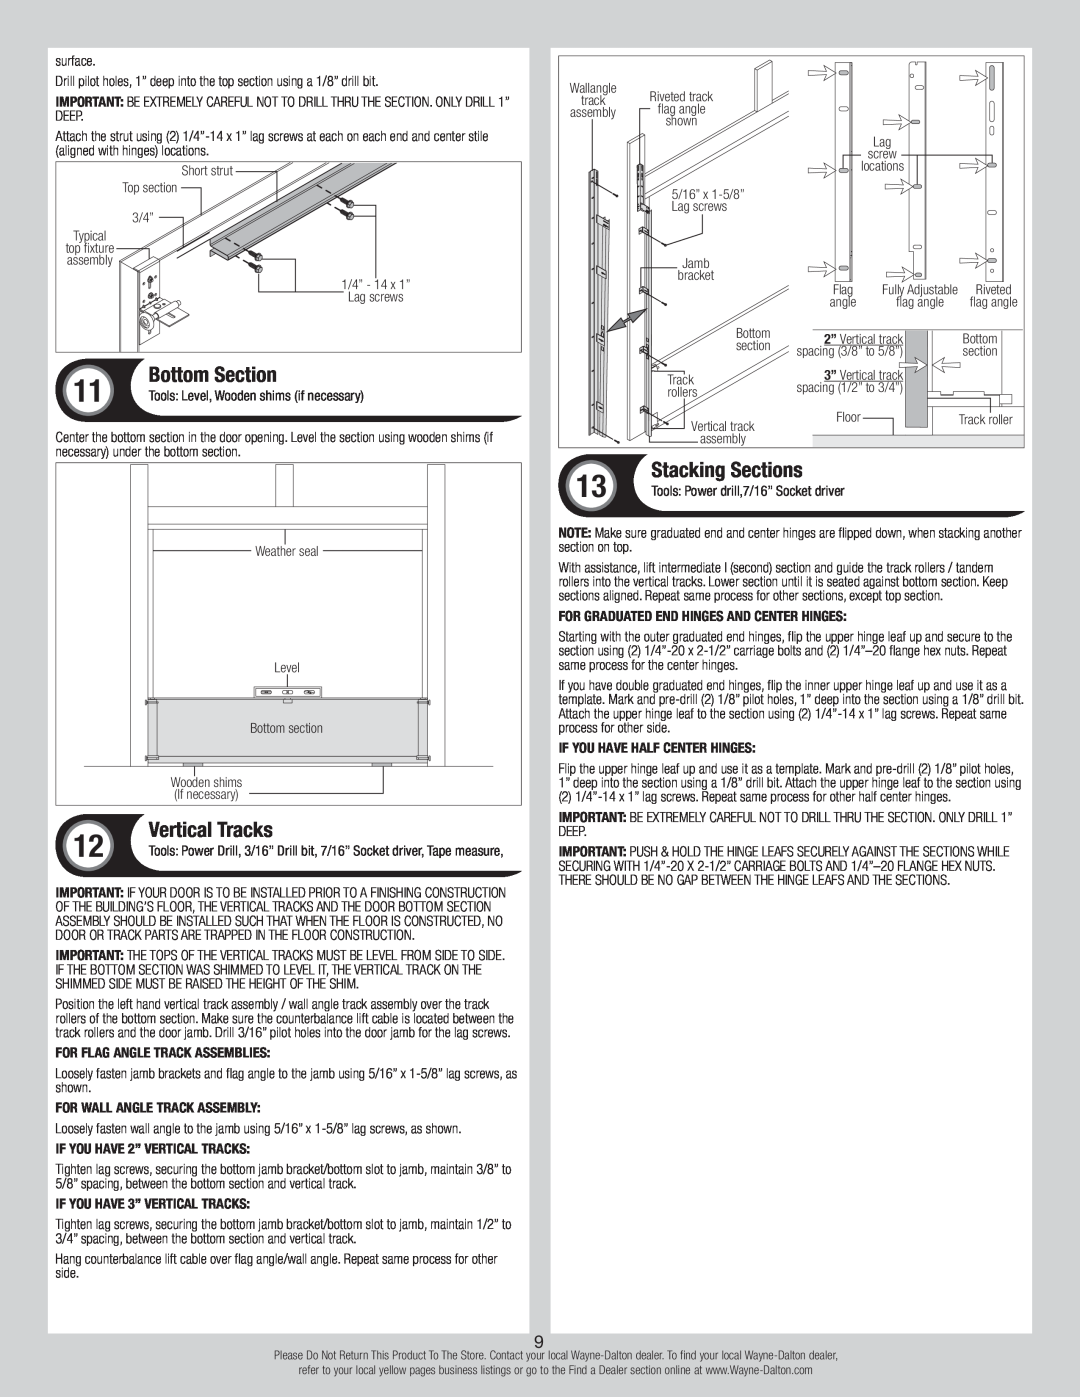 Wayne-Dalton 44 installation instructions Bottom Section, Vertical Tracks, Stacking Sections 